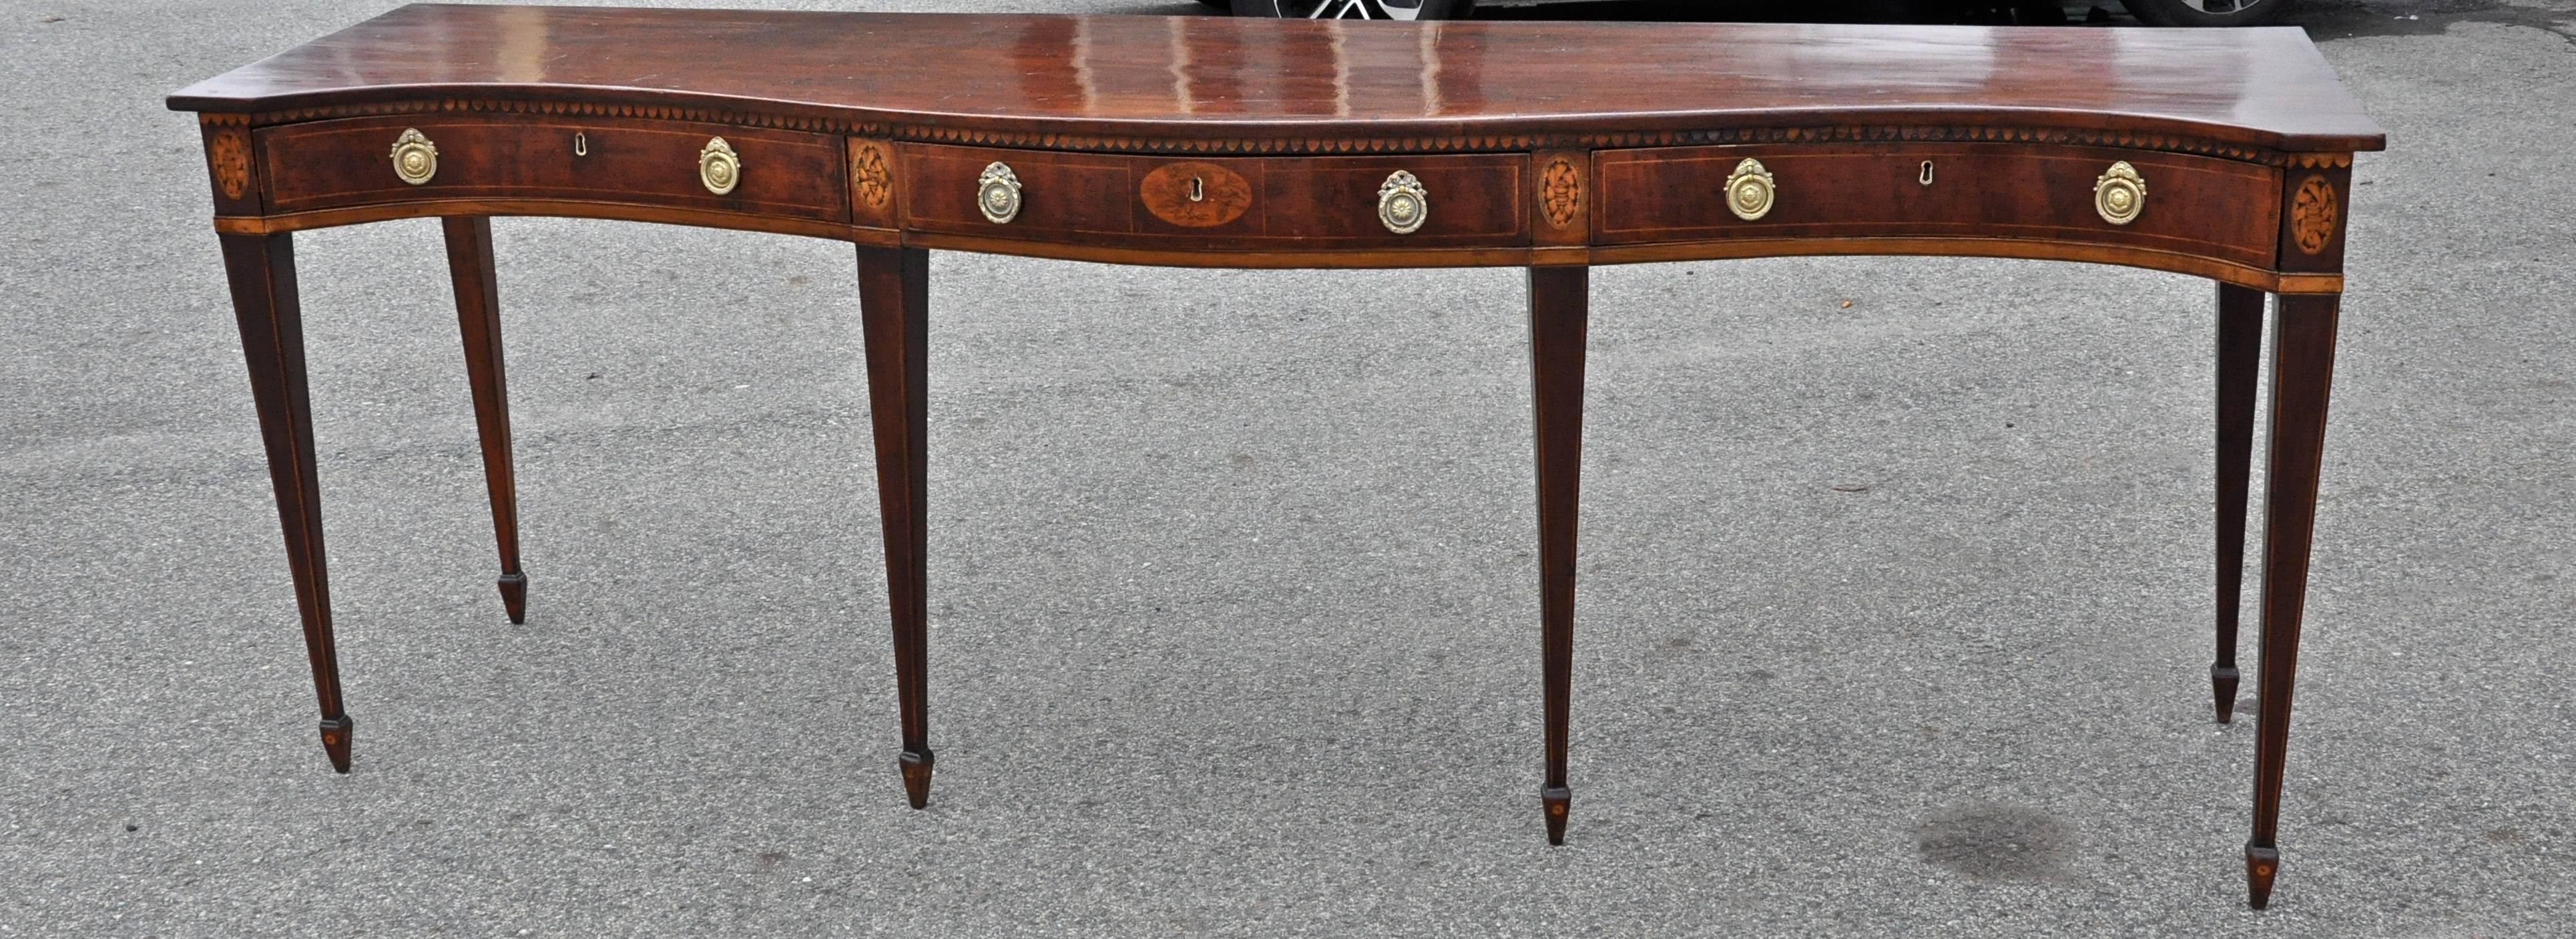 English 18th Century George III Mahogany Serpentine Serving Table or Sideboard